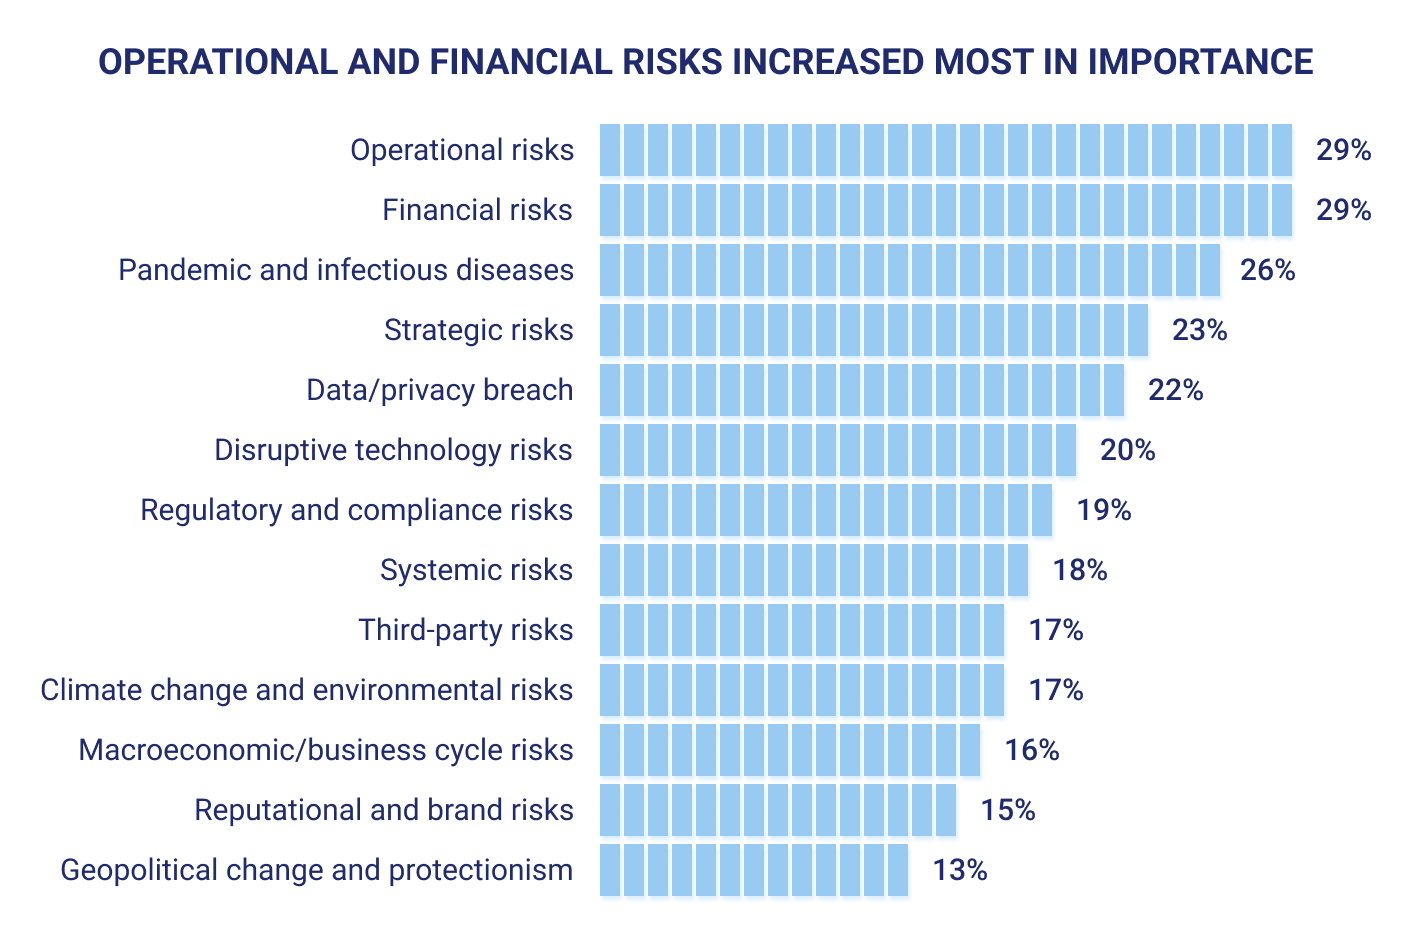 The most important operational and financial risks in 2022